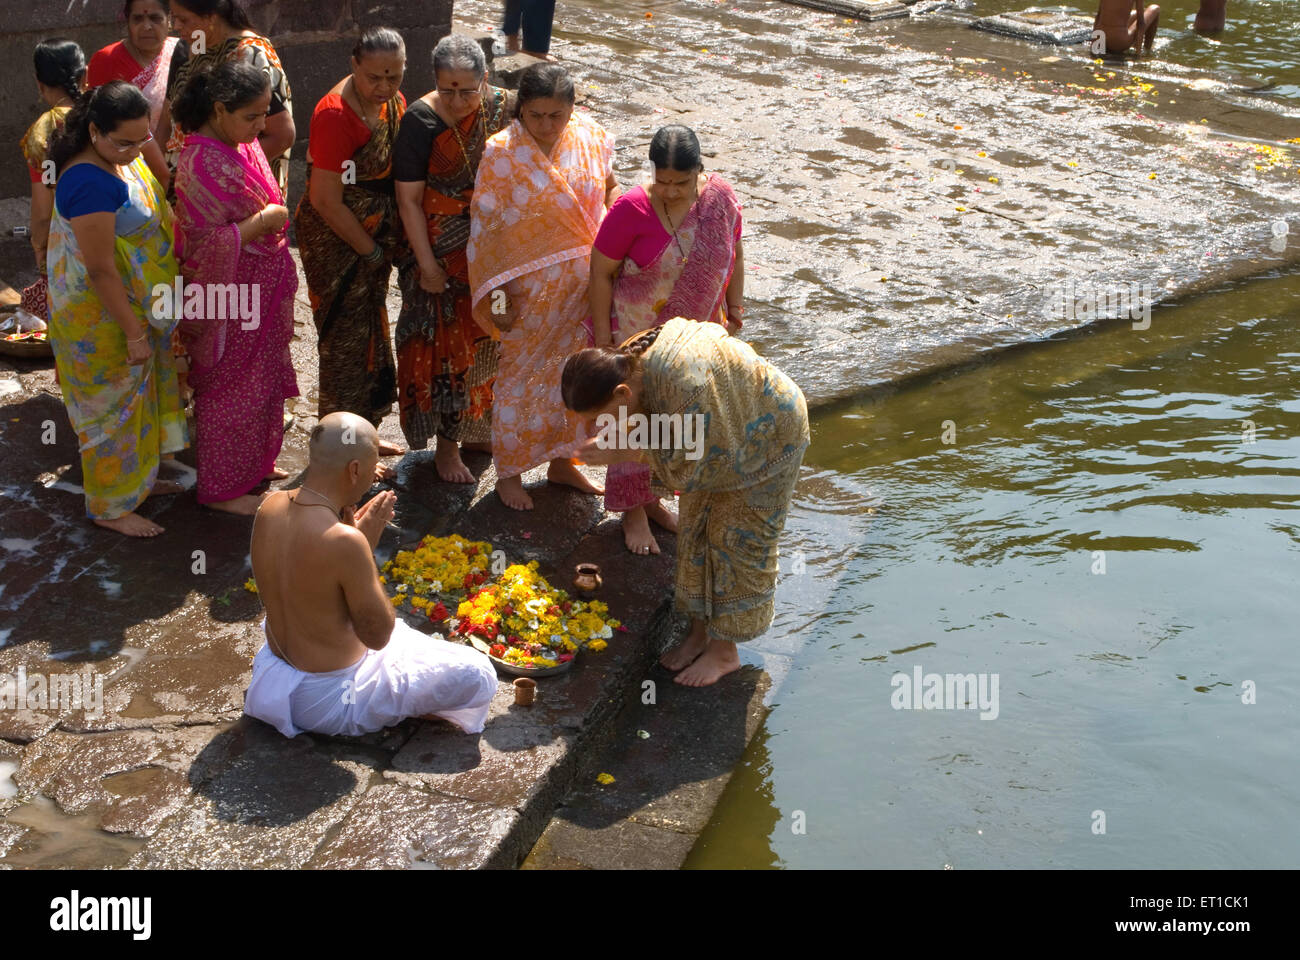 Hindu ritual near river, India, man praying ceremony for departed souls Stock Photo